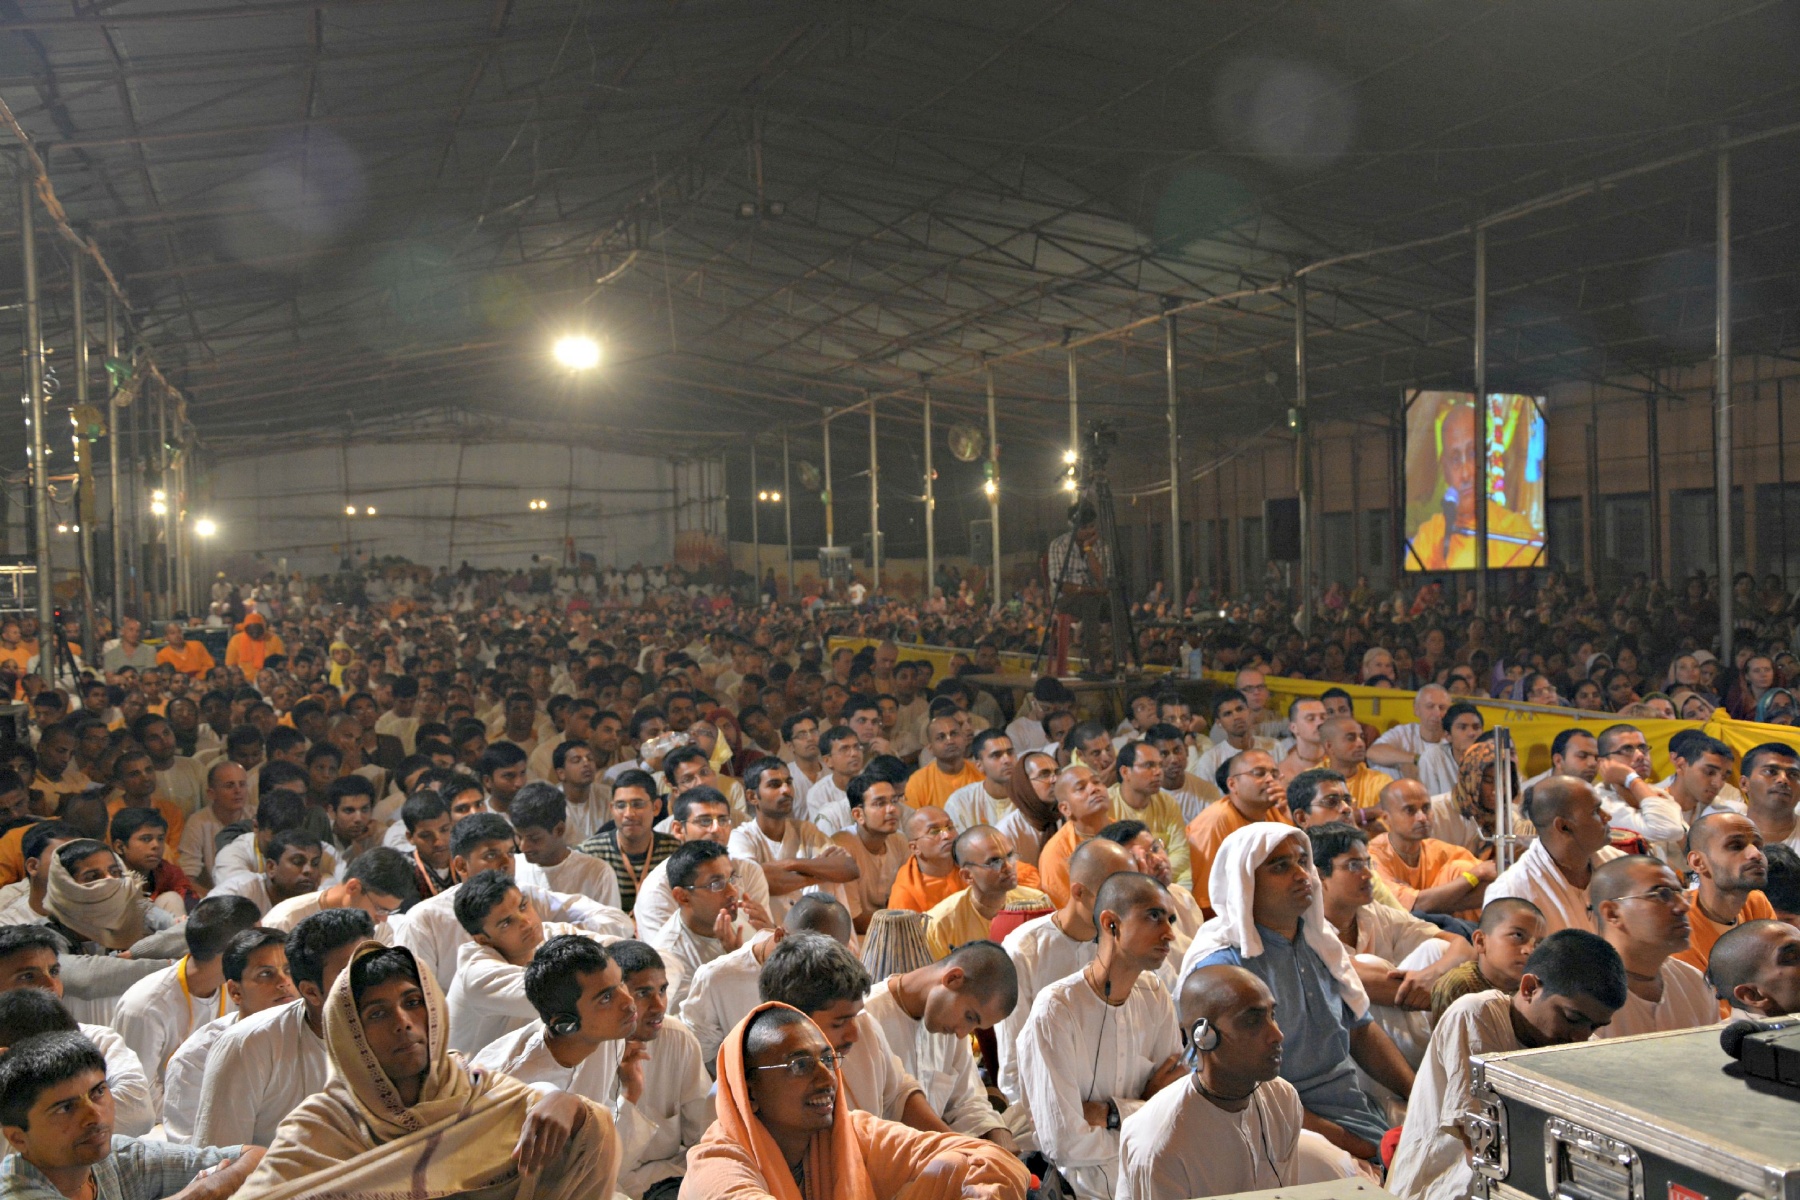 Devotees listening to lecture